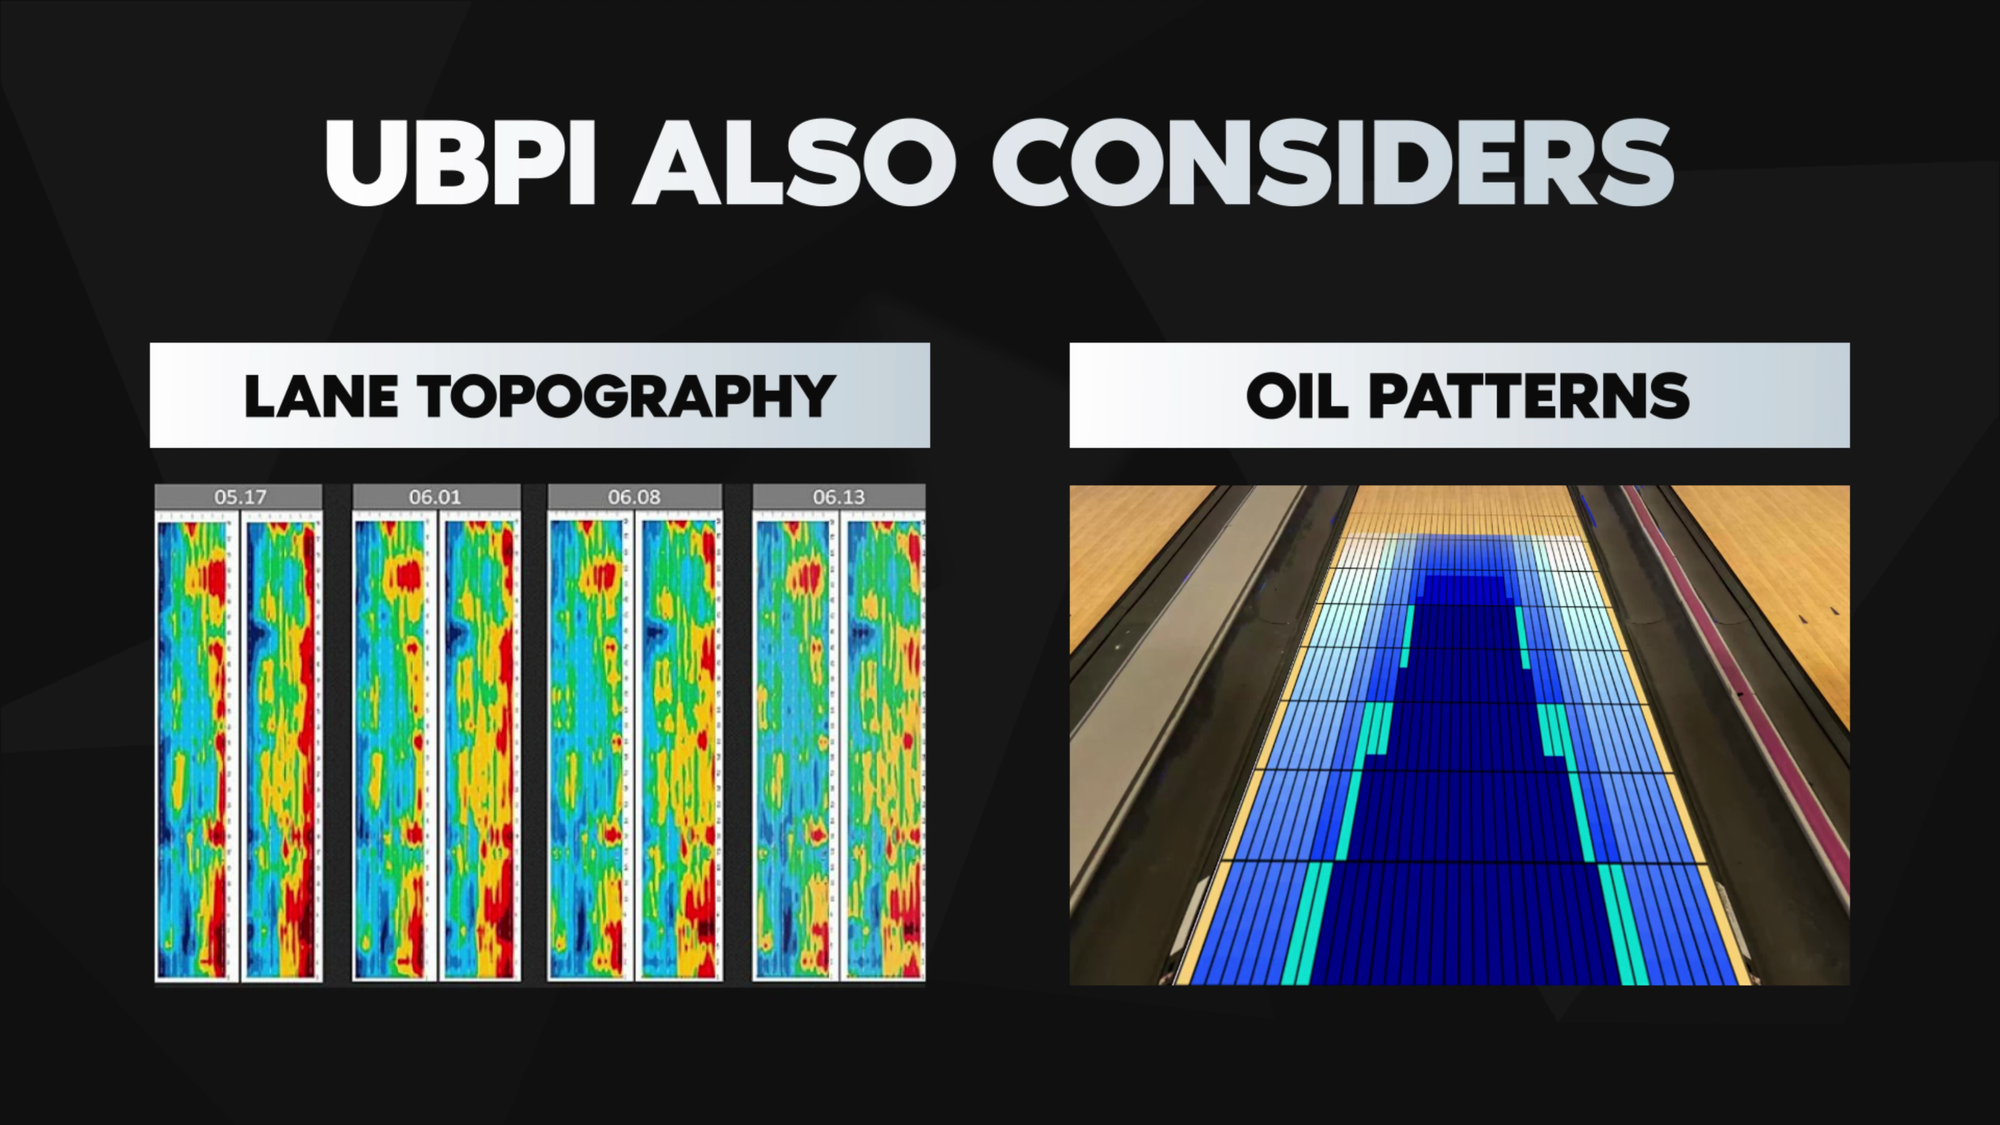 WBL UBPI Considers Oil Patterns and Topography